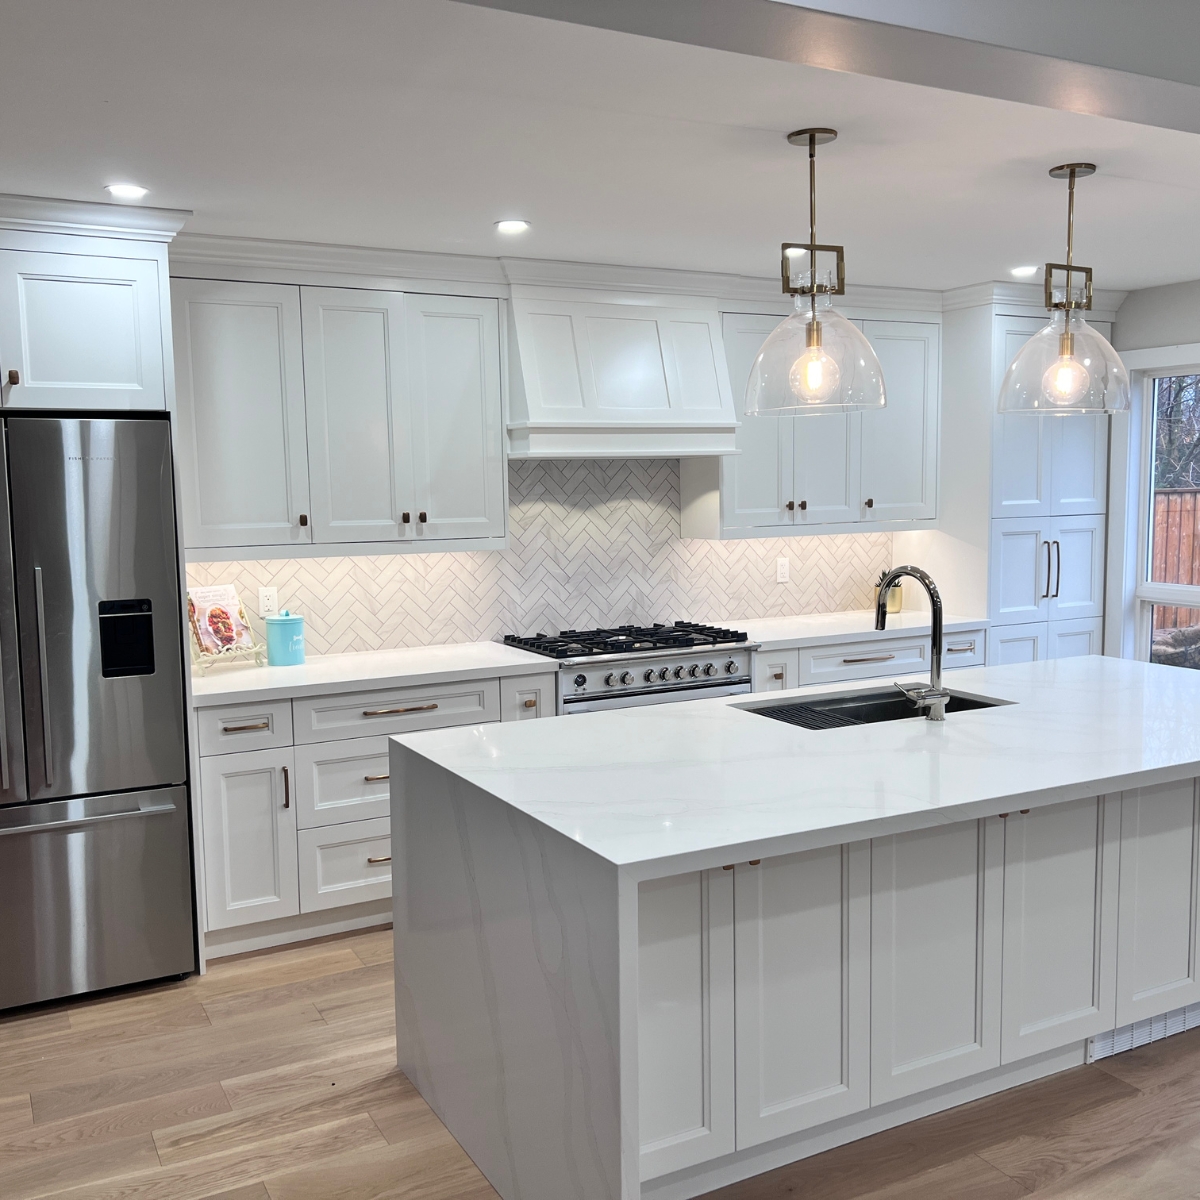 traditional kitchen with white counters and shaker doors